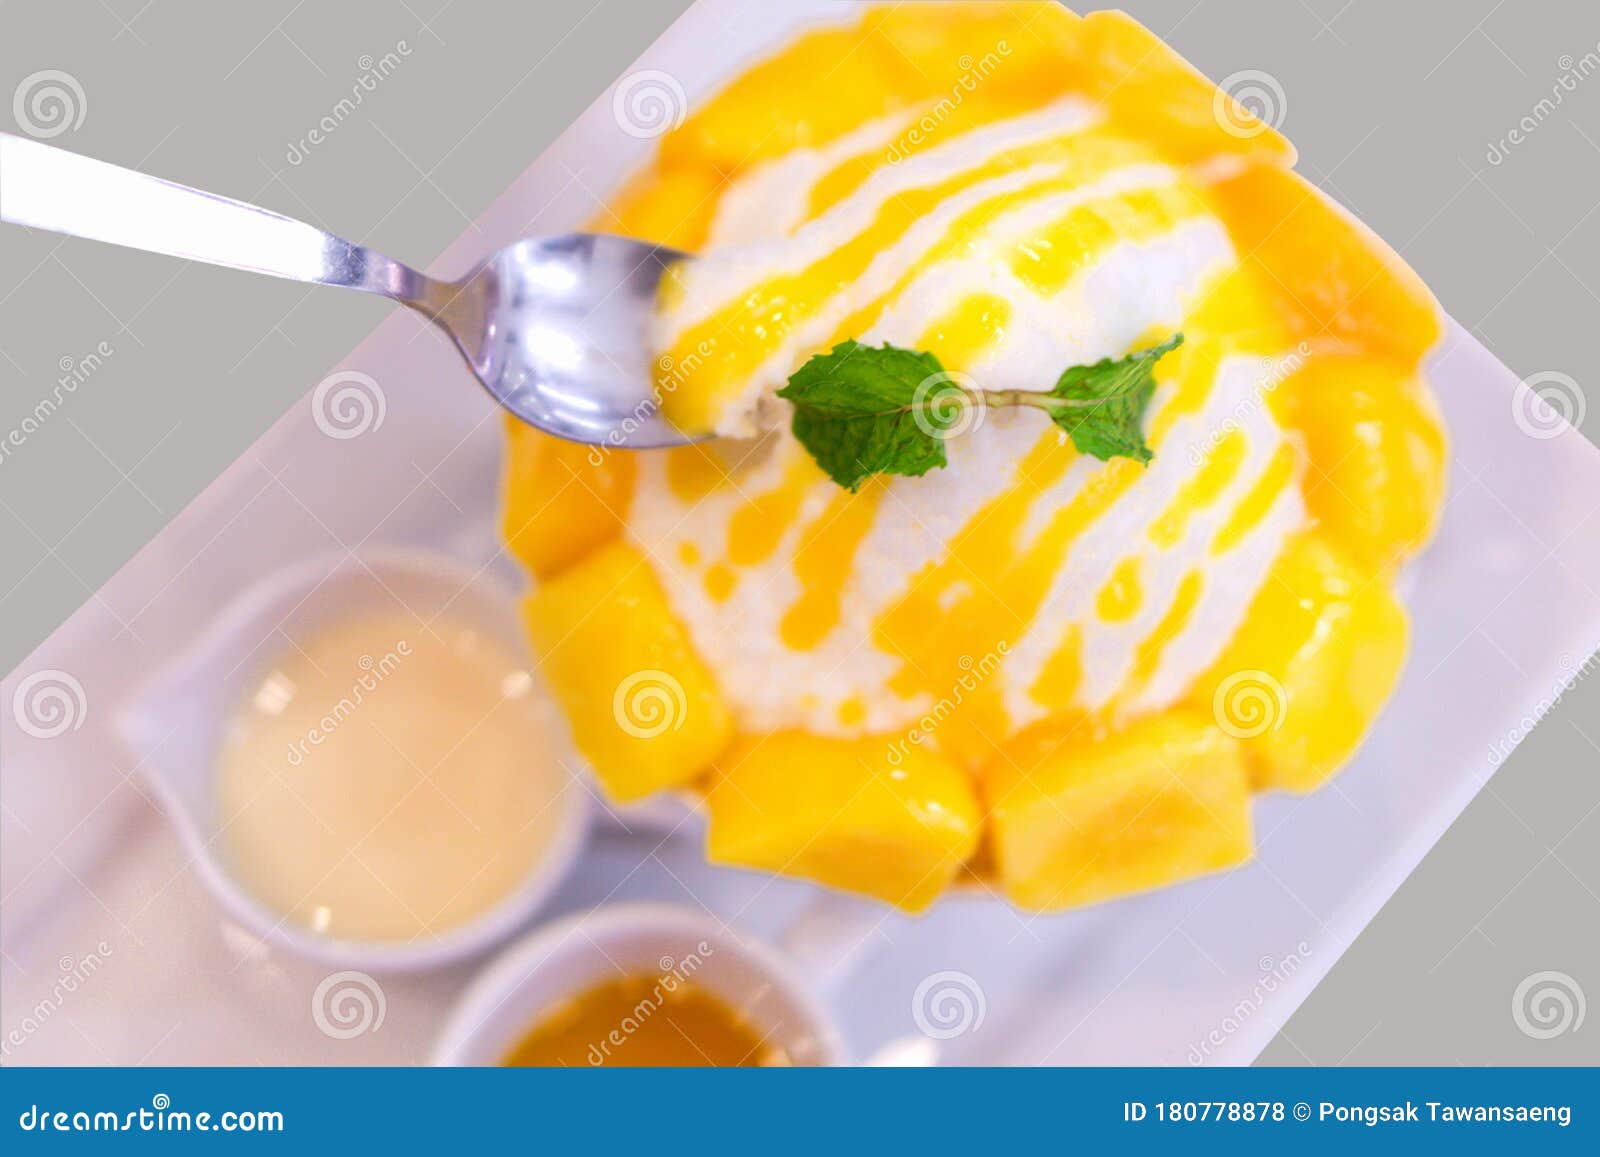 Close Up Mango Bing Su with Sauces in White Plate Stock Photo - Image ...